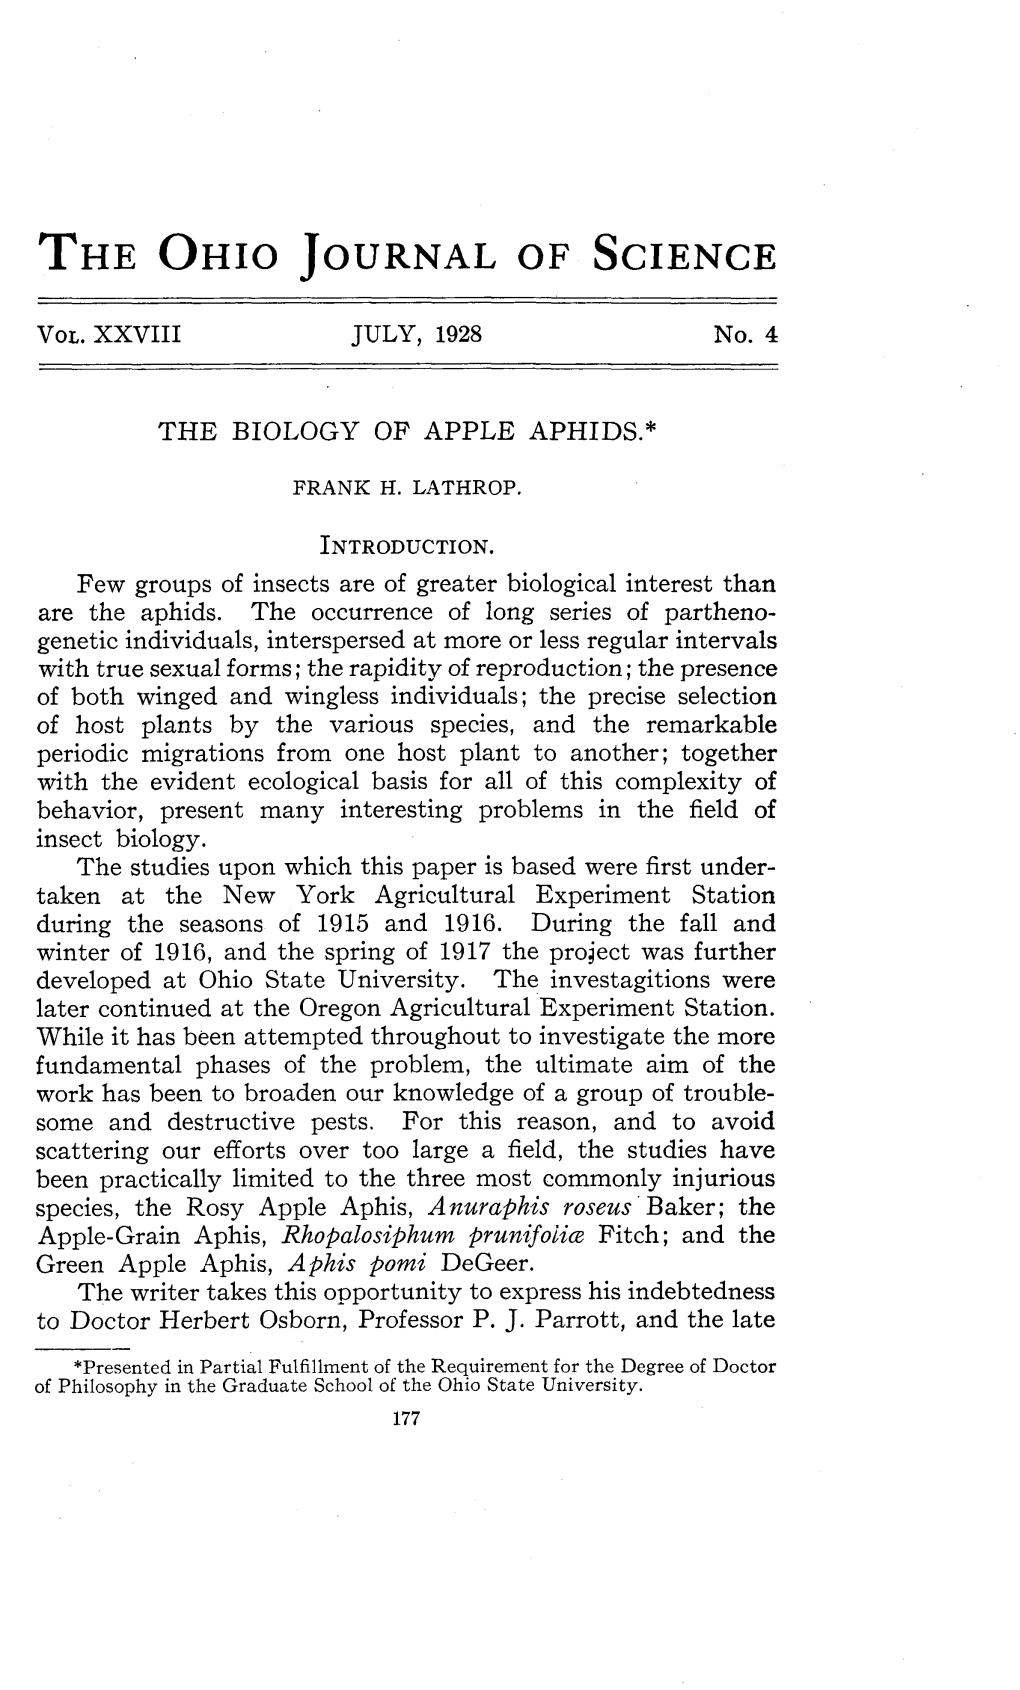 The Biology of Apple Aphids.*